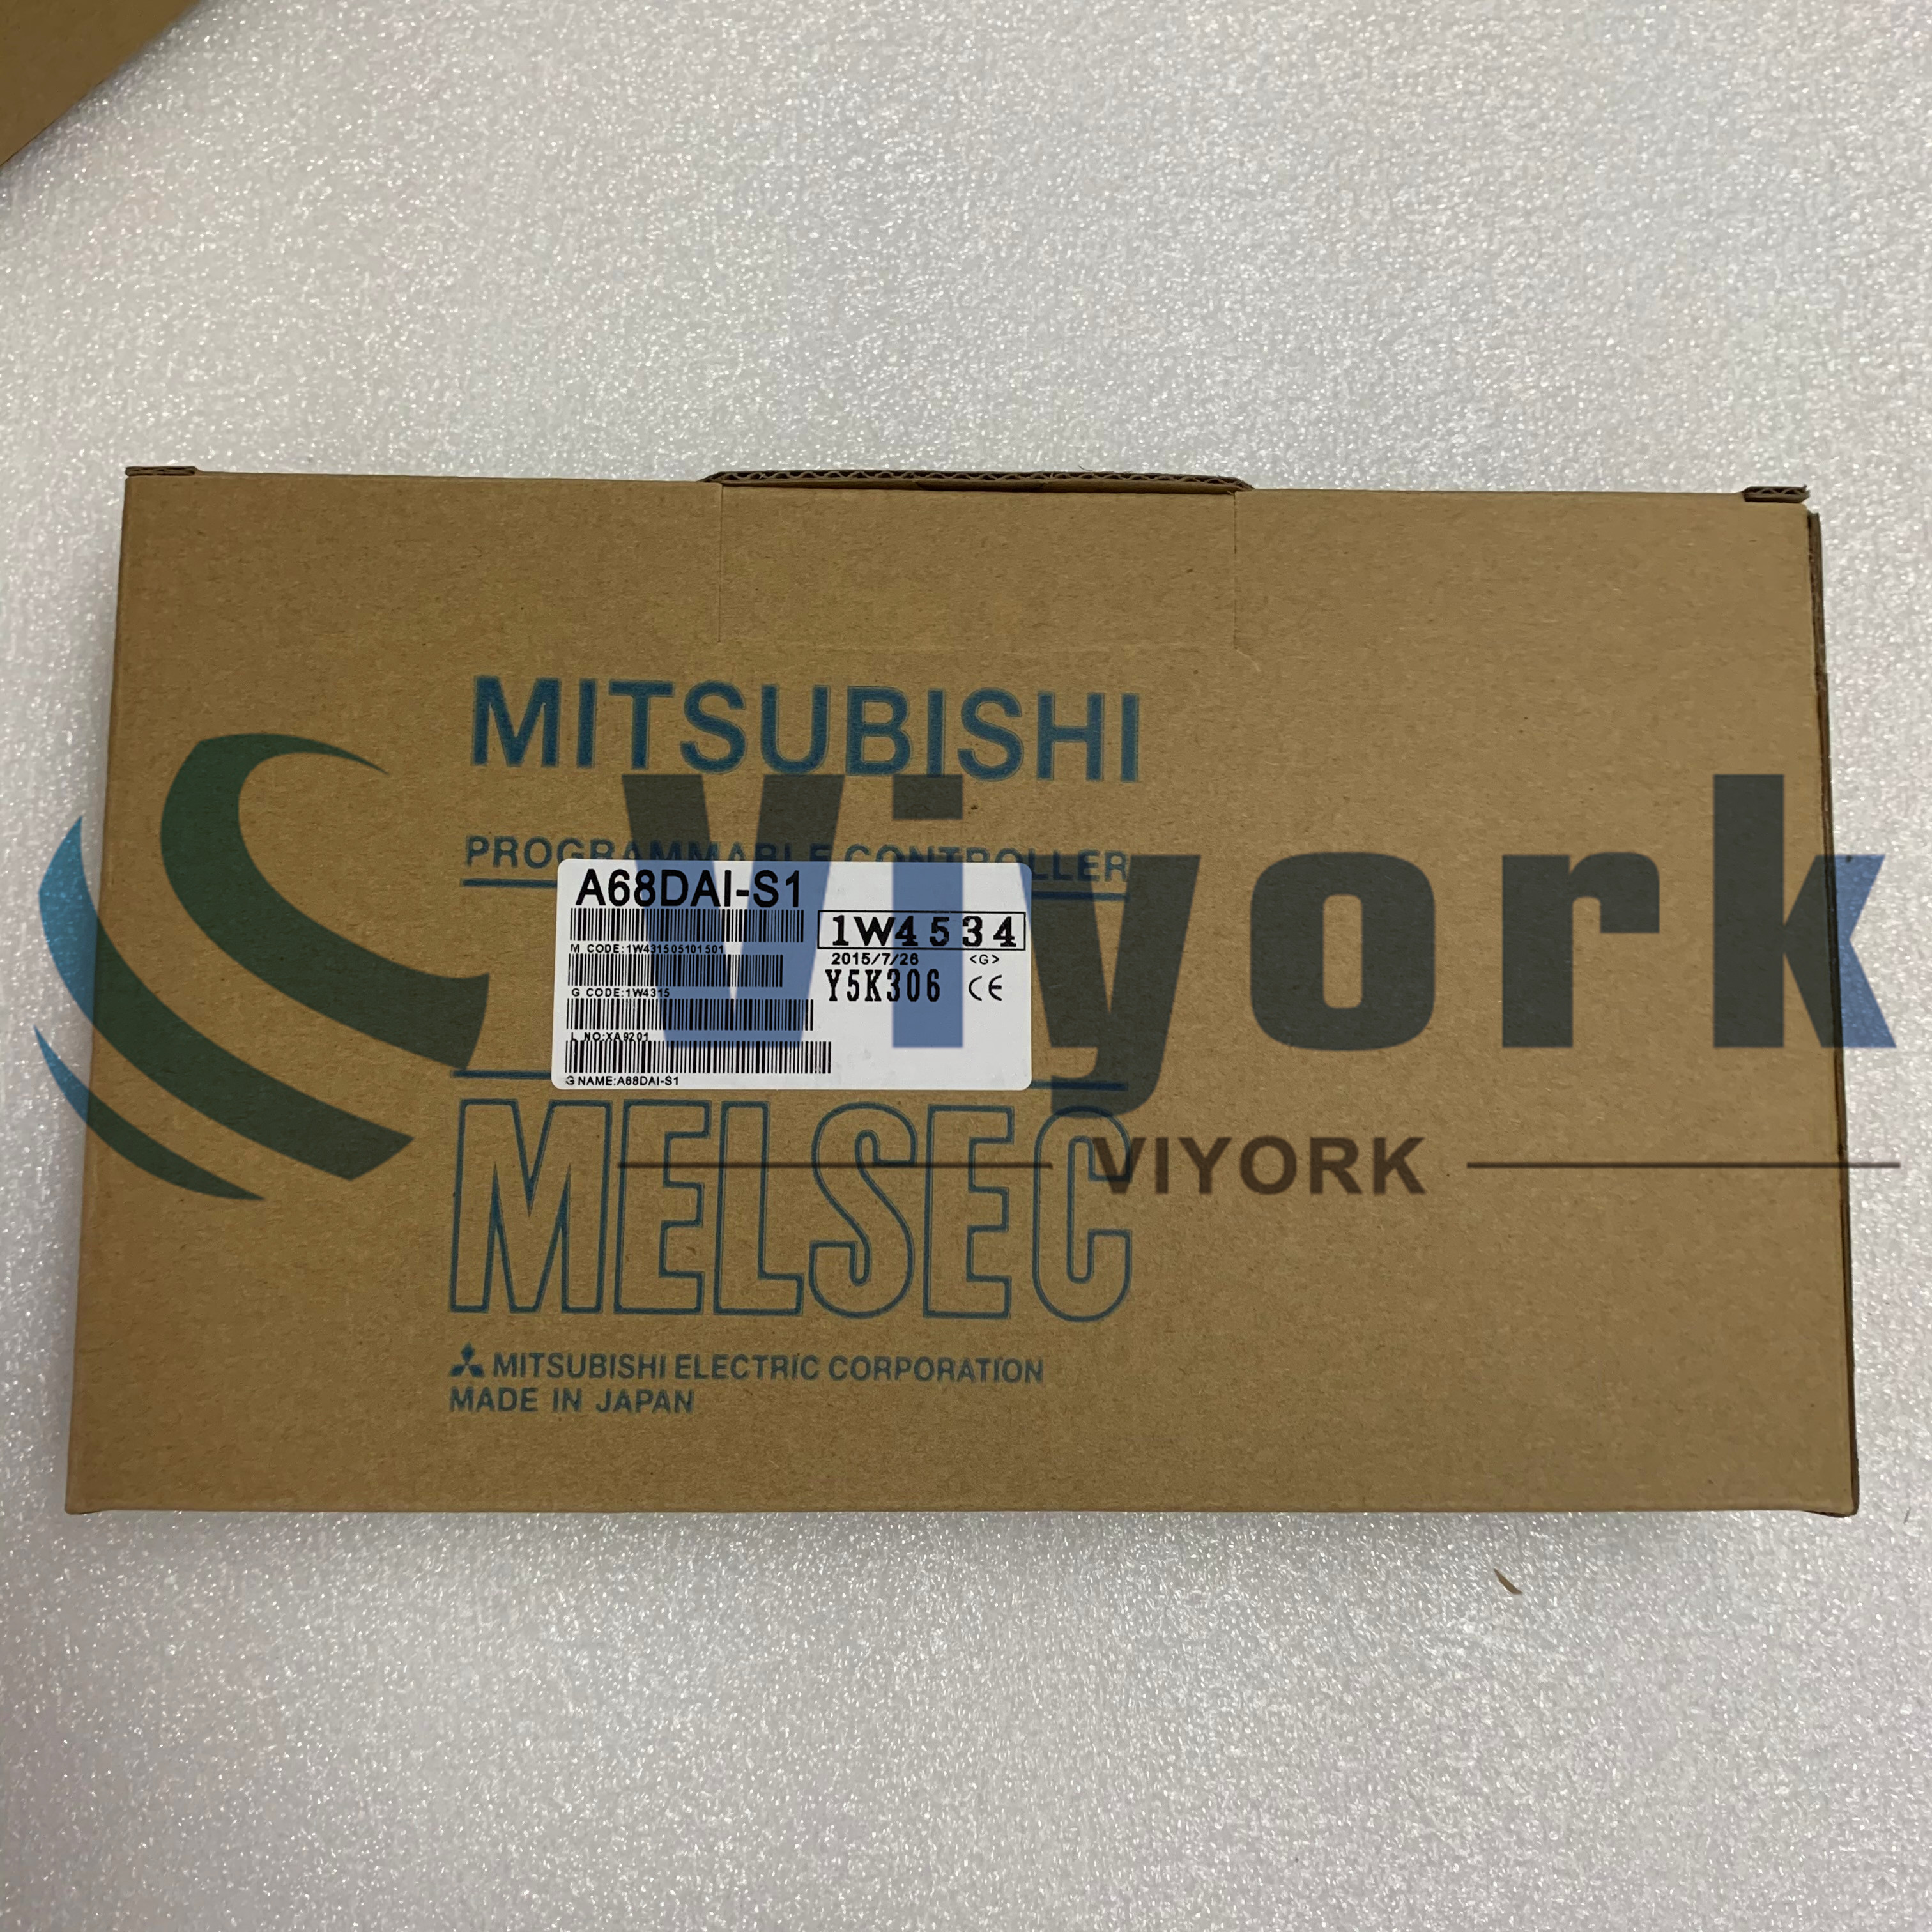 Mitsubishi A68DAI-S1 PLC MODULE MELSEC-A SERIES ANALOG OUTPUT 8 CHANNEL CARD NEW